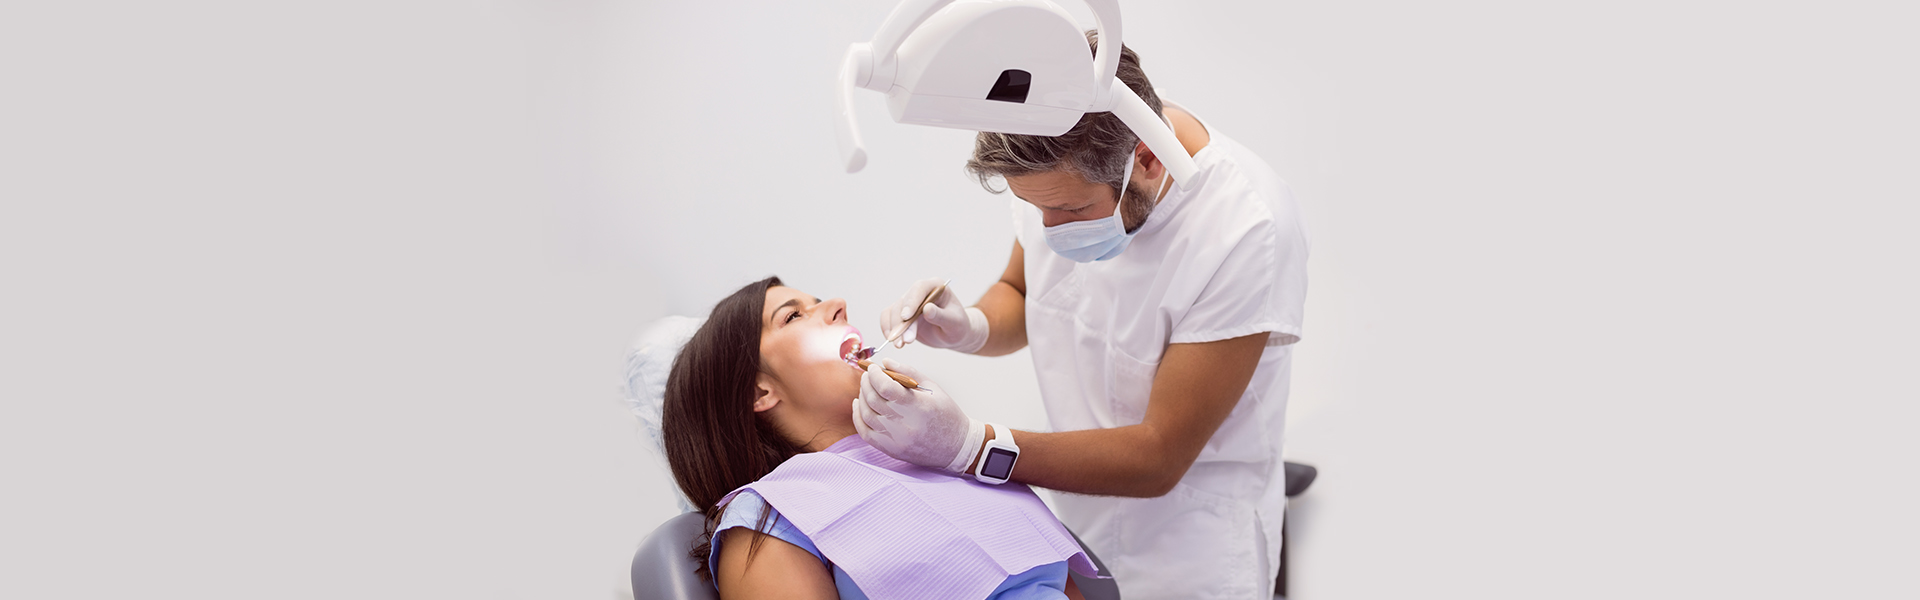 How to Recover Quickly After Dental Implant Surgery?